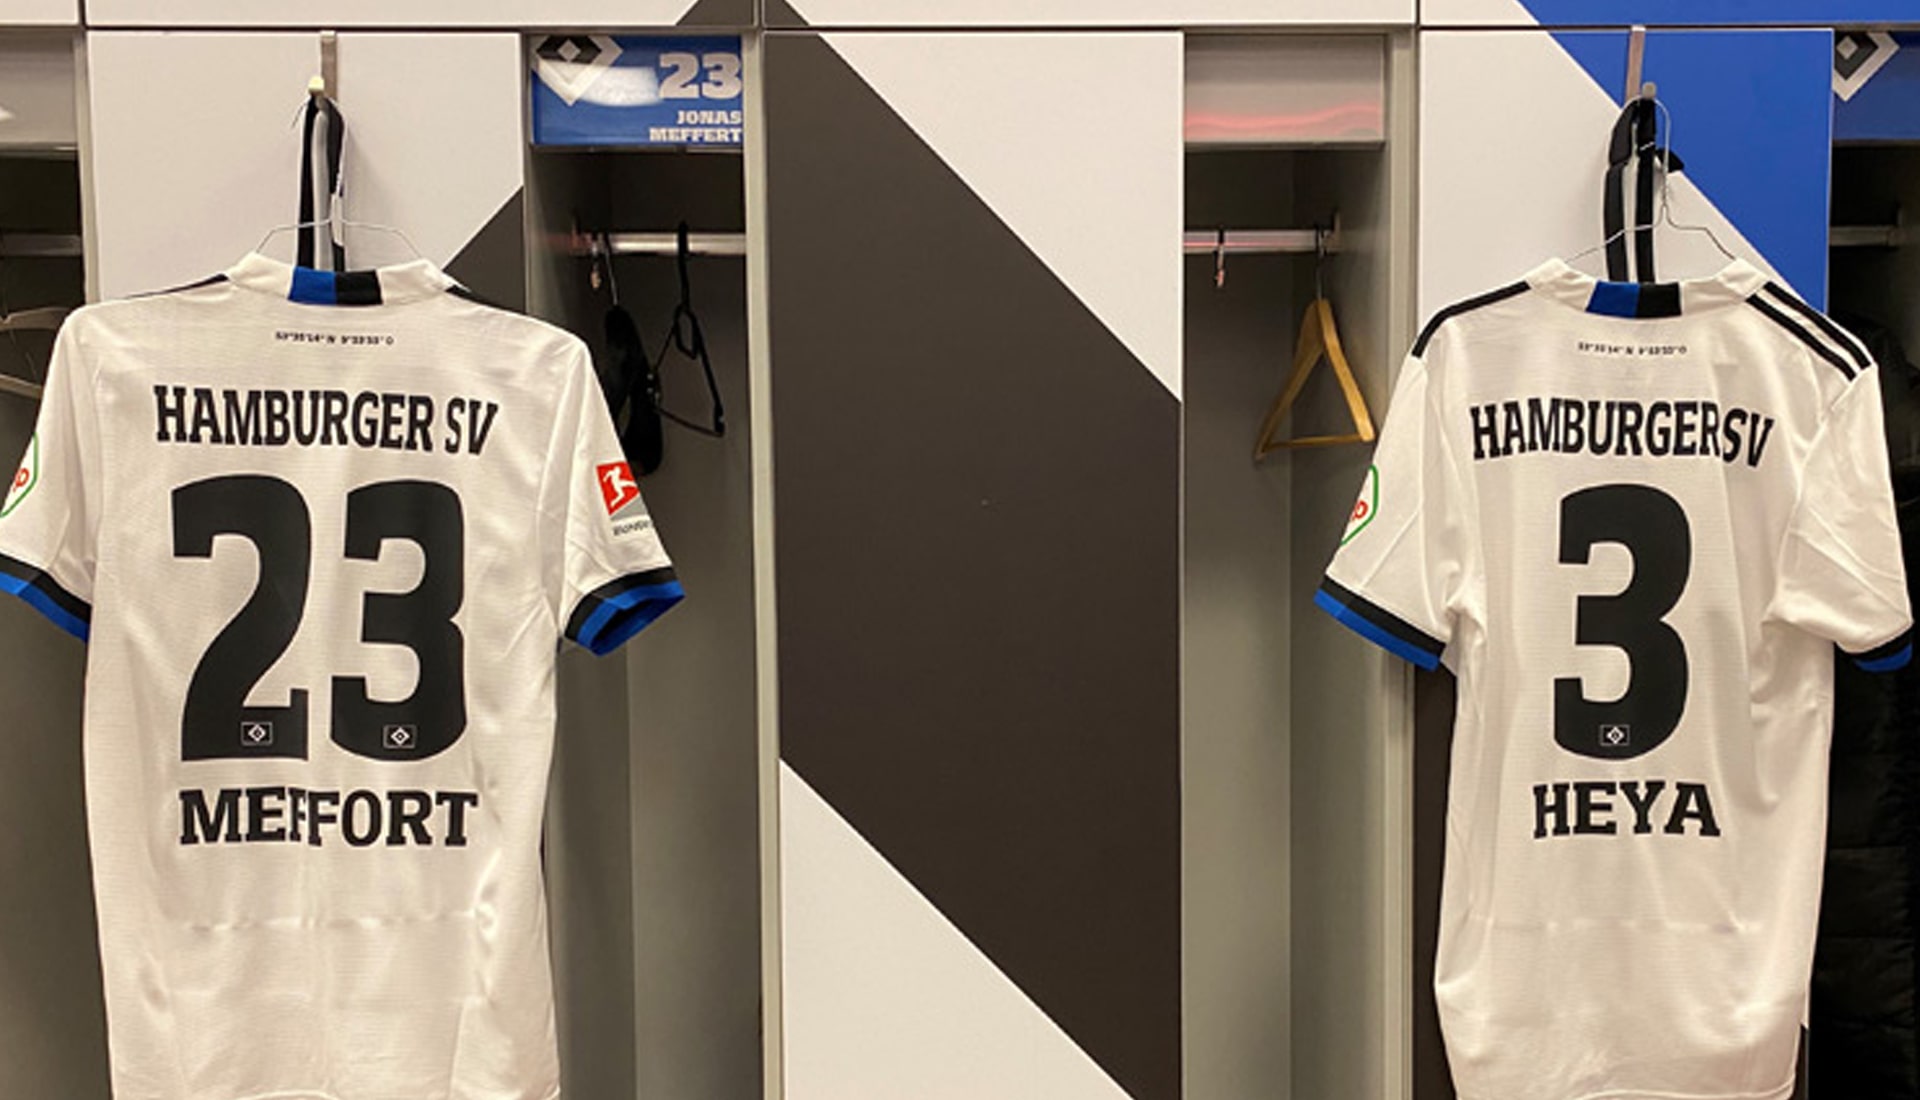 Hamburger SV Misspell Players' Names To Convey Important Message